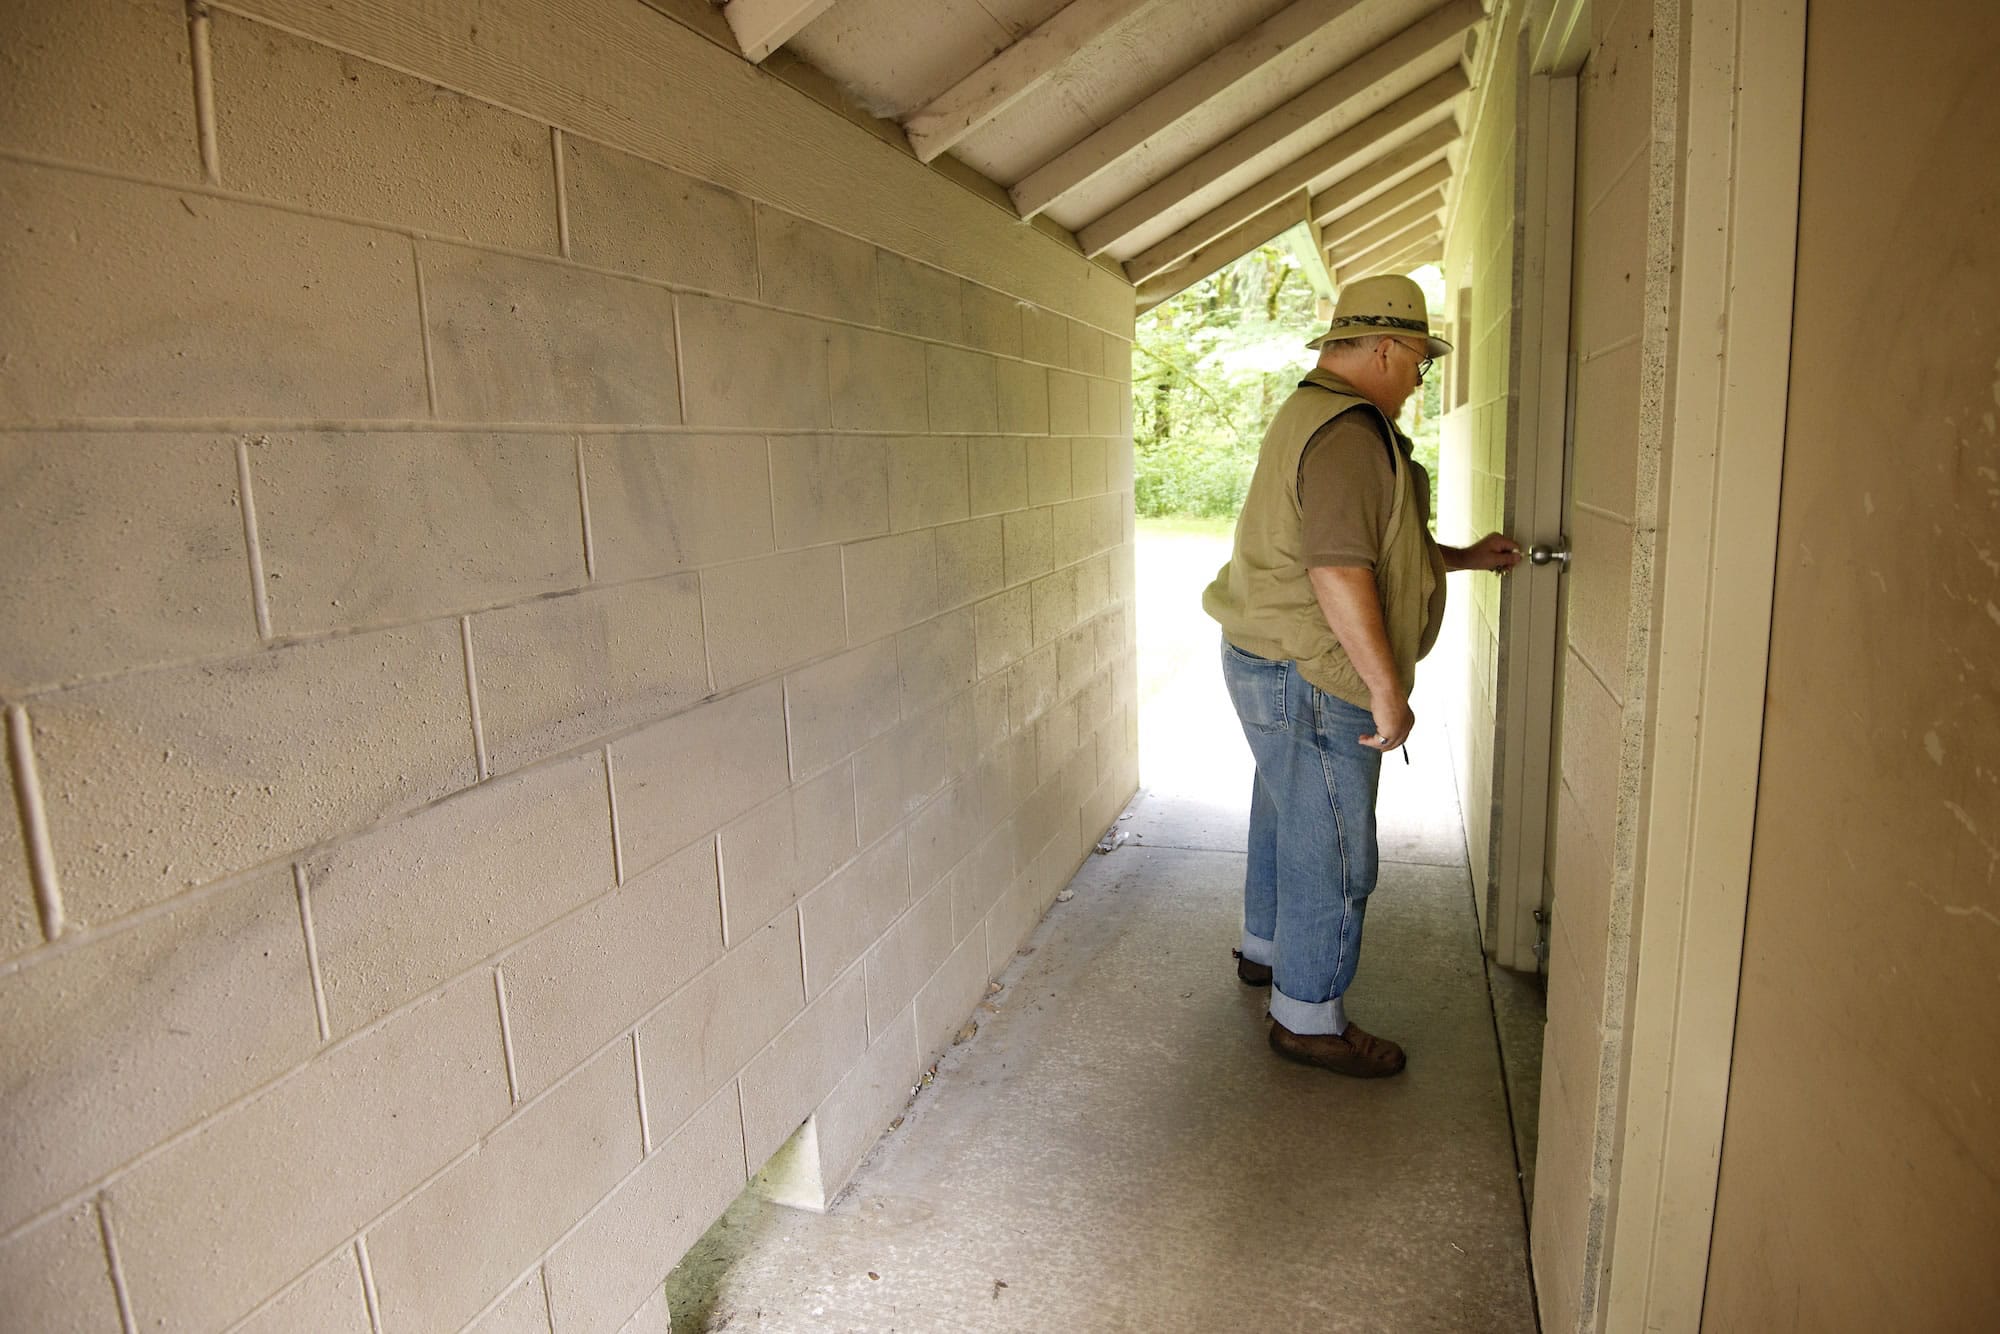 Hal Bauder, Clark County parks maintenance crew chief at Lewisville Park, examines a bathroom facility Thursday damaged by vandals.